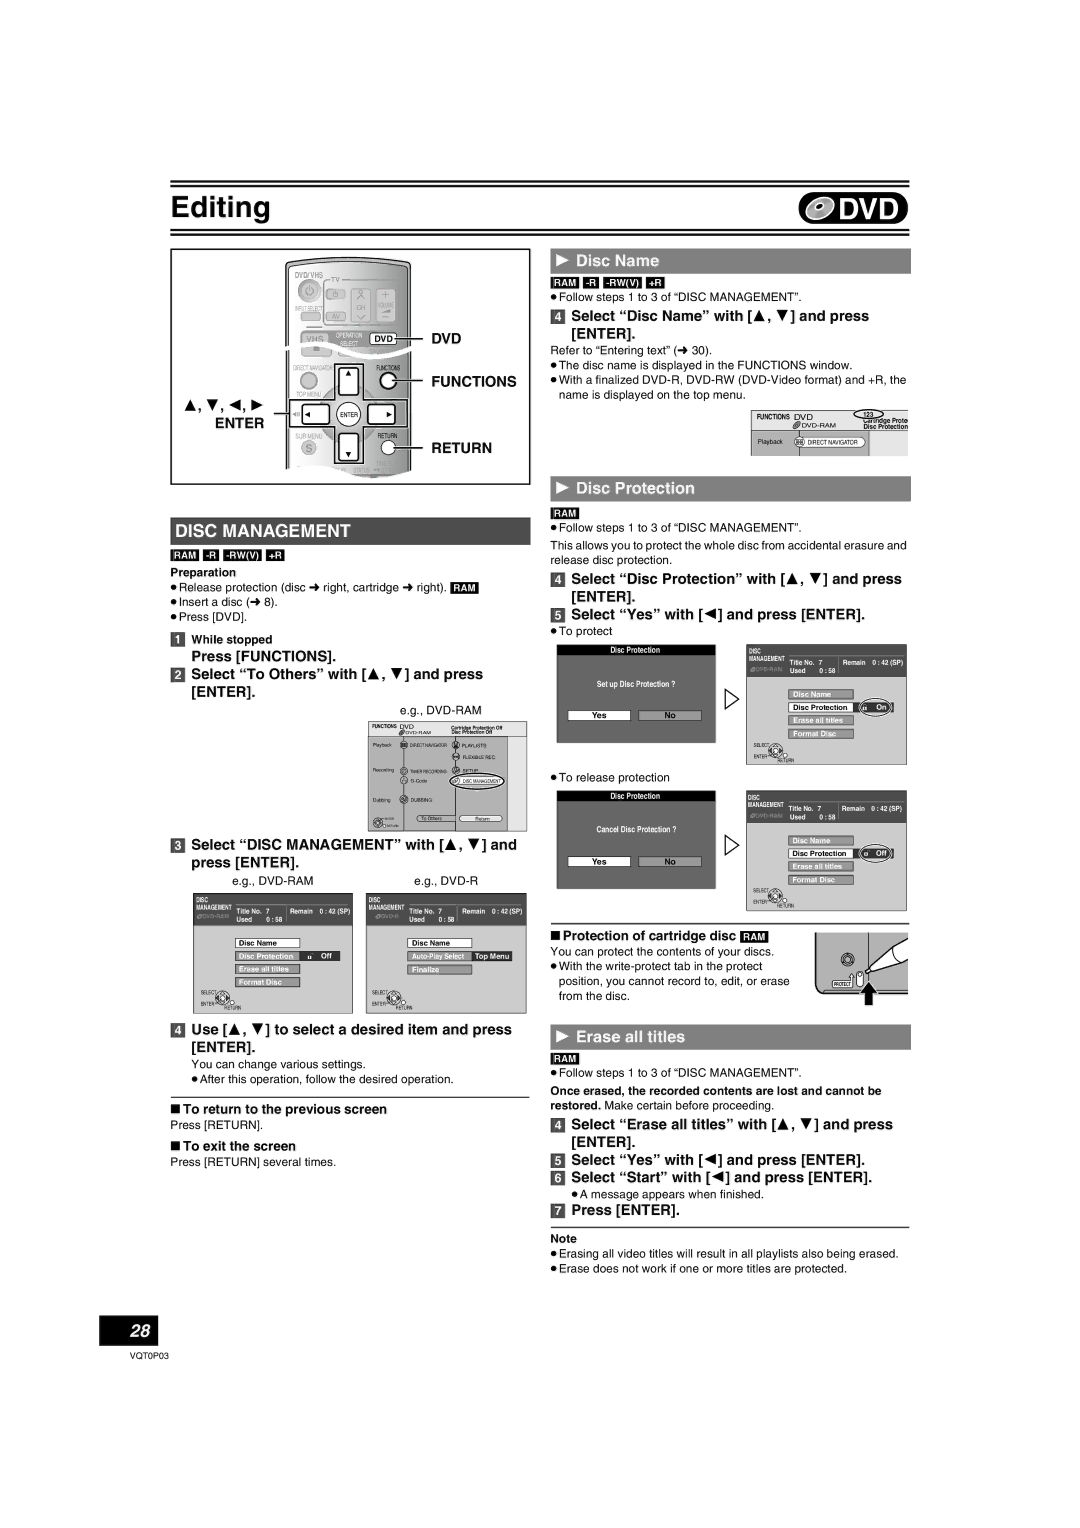 Panasonic DMR-ES30V operating instructions Disc Protection, Erase all titles, Select Disc Name with 3, 4 and press 